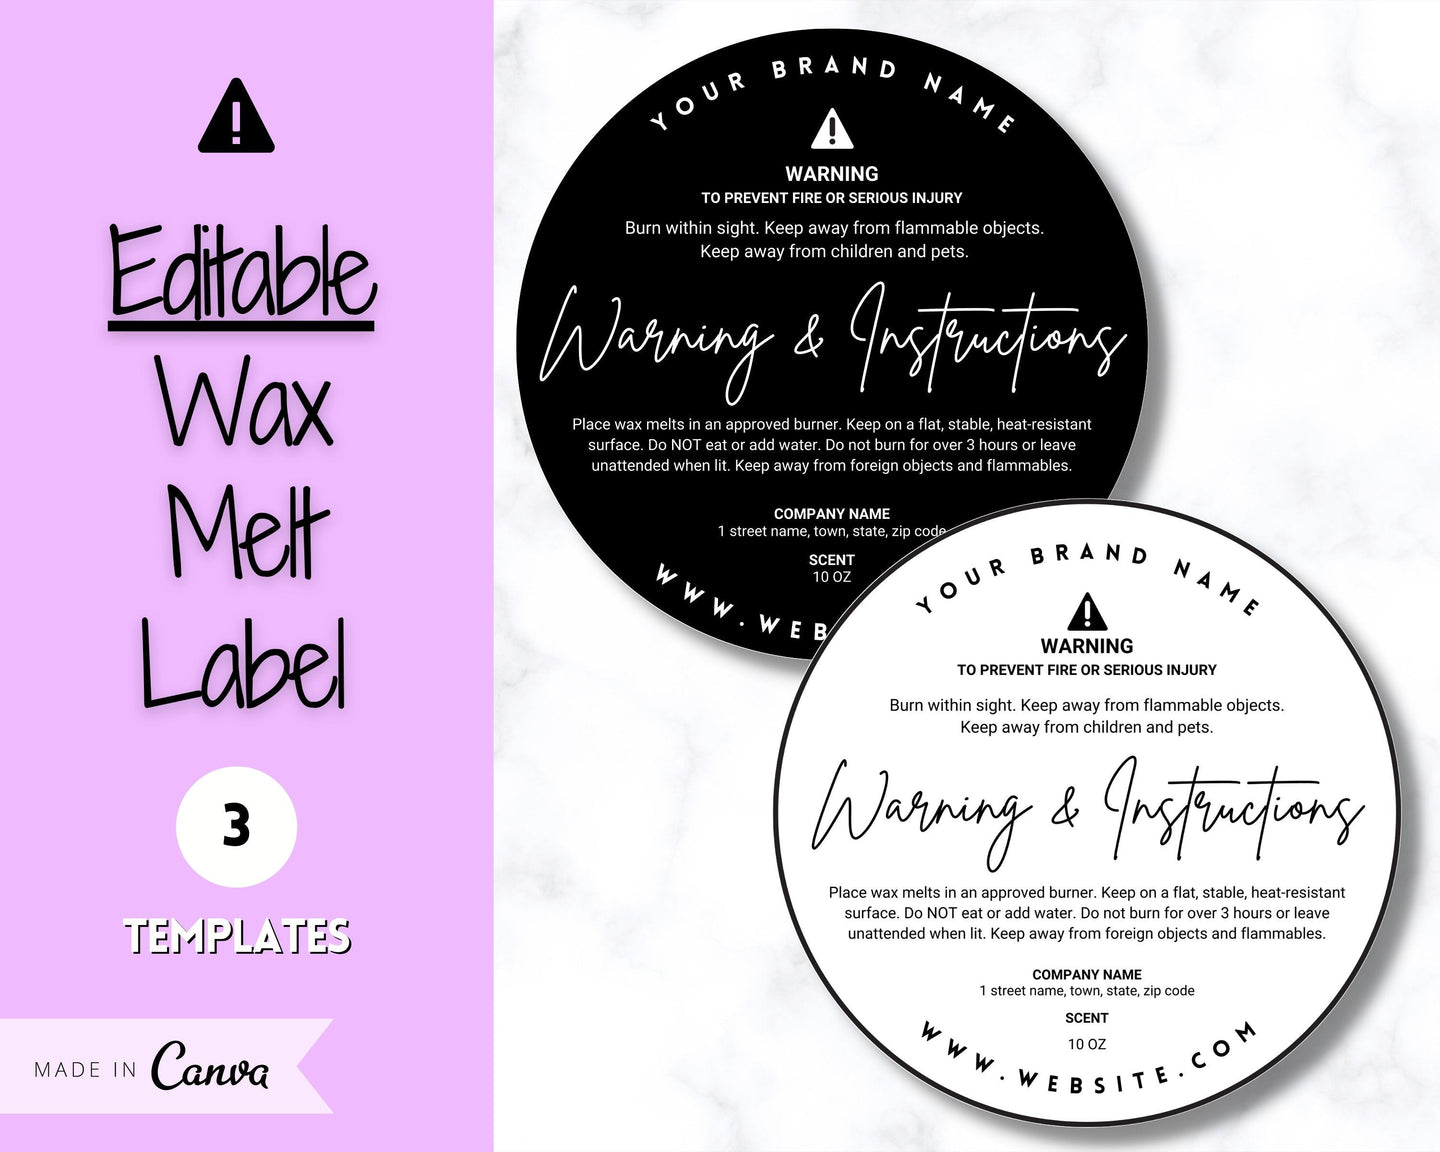 Editable Wax Melt Warning Label Template Care & Fire Safety